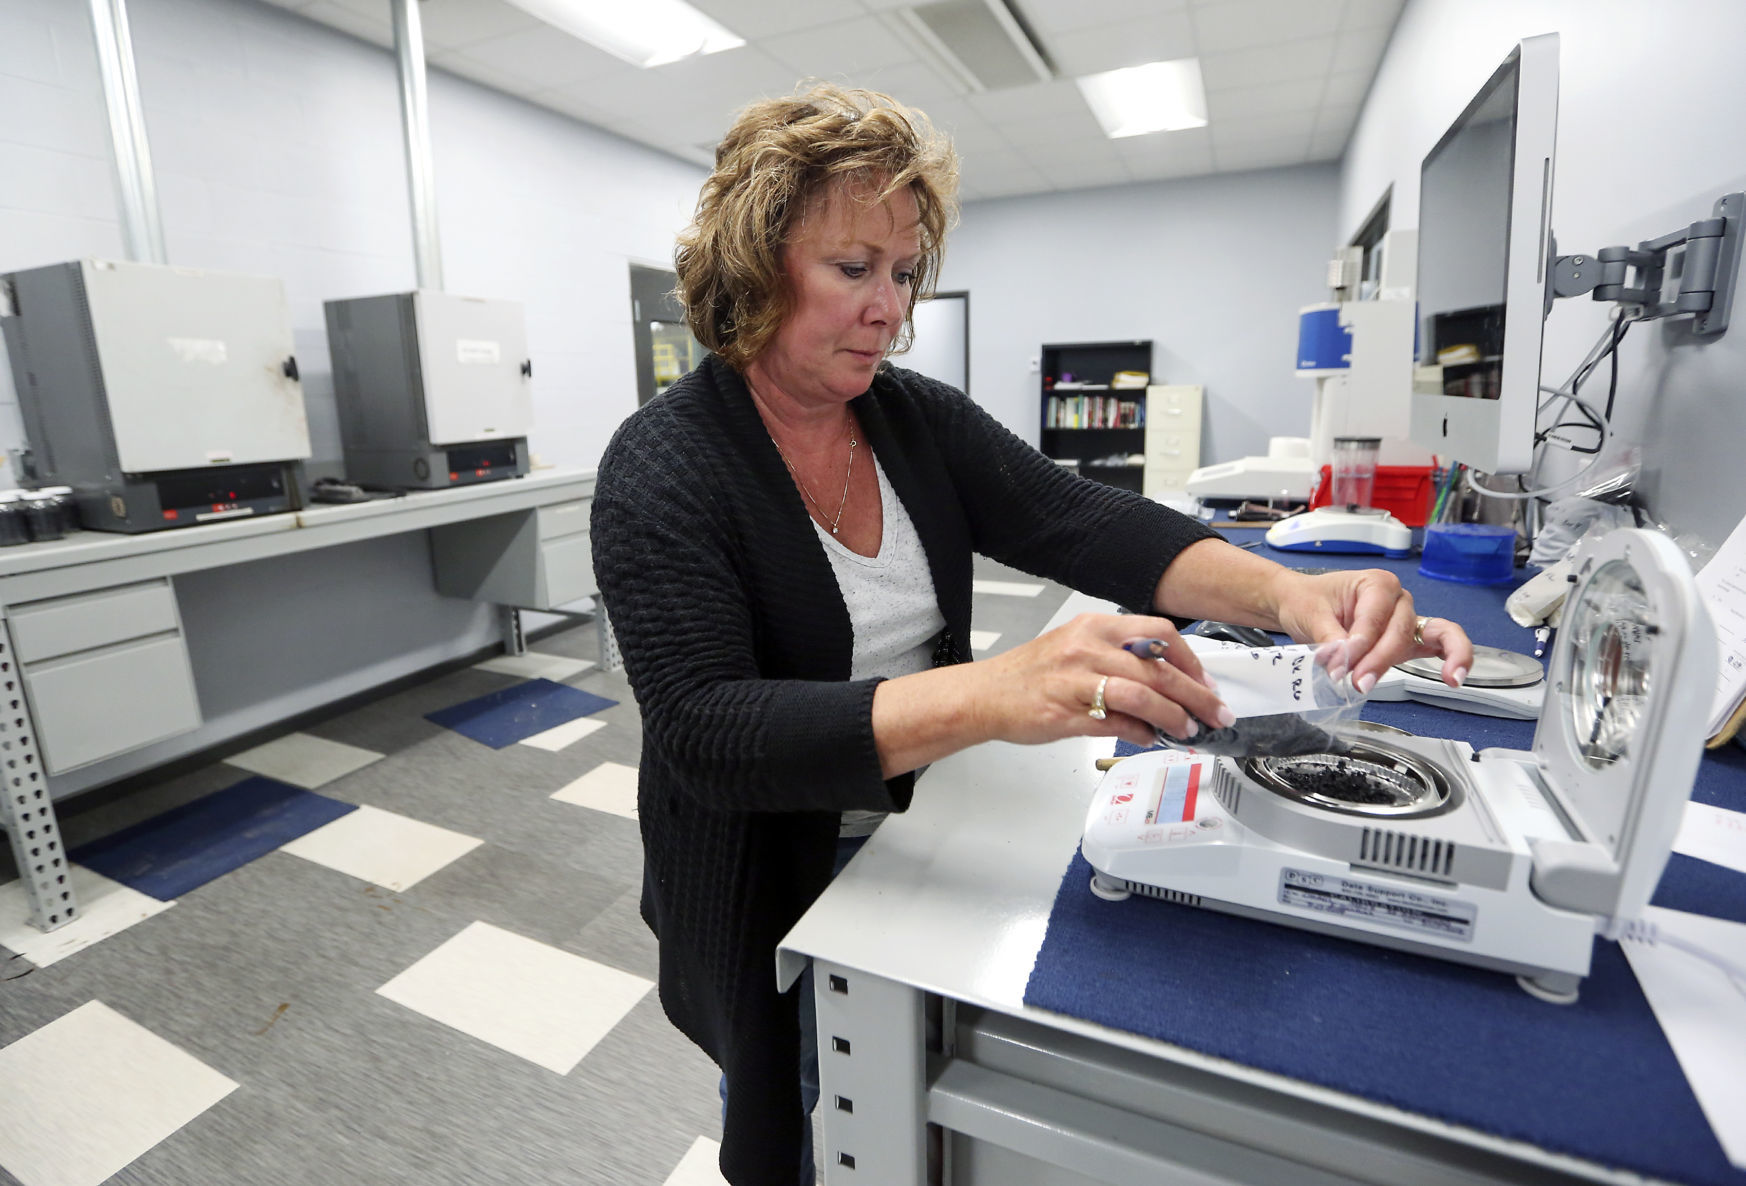 Connie Nebel tests the moisture of raw material at JEDA Polymers in Dyersville, Iowa, on Monday, July 30, 2018.    PHOTO CREDIT: NICKI KOHL